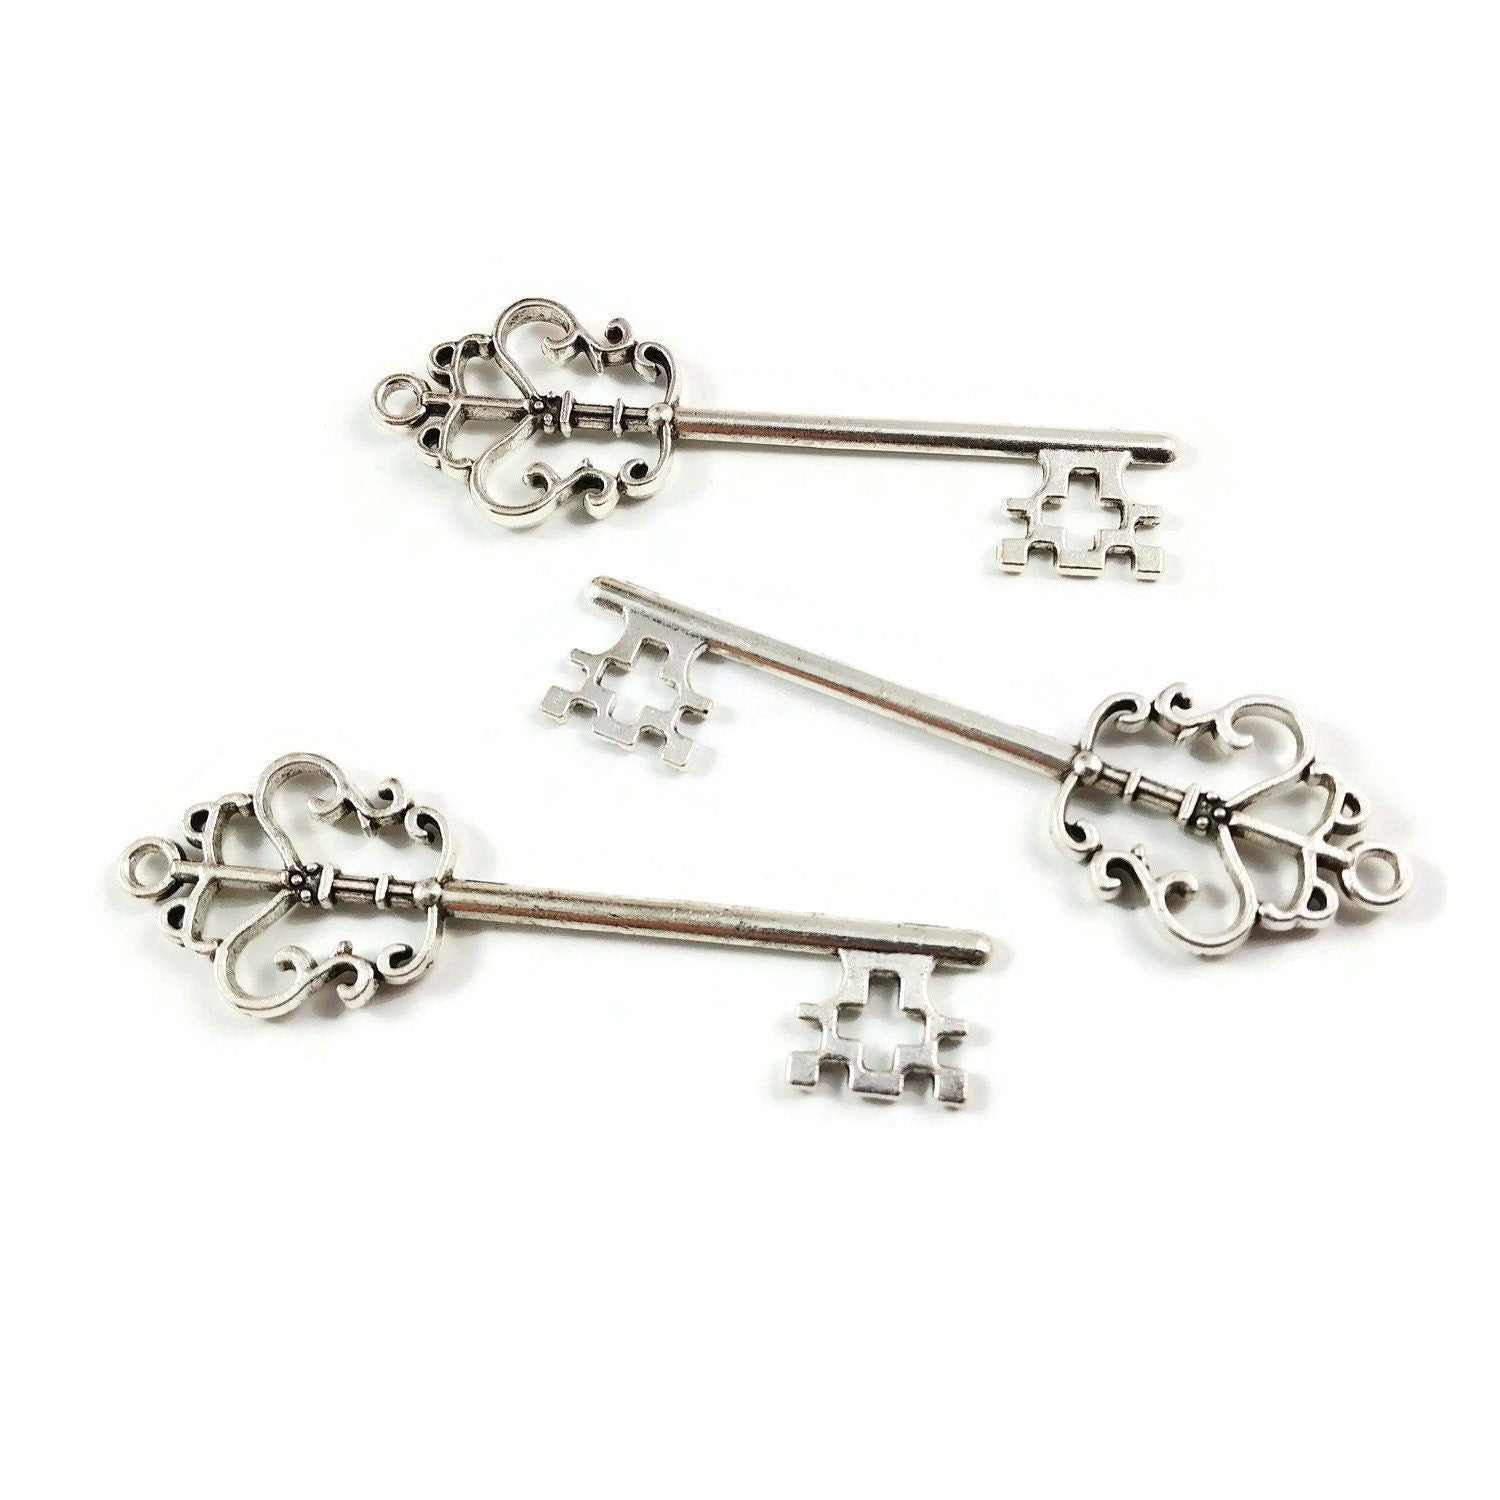 12pcs Antique Silver Huge Skeleton Key Craft Supplies Charms Pendants for Crafting, Jewellery Findings Making Accessory For DIY Necklace Bracelet m102